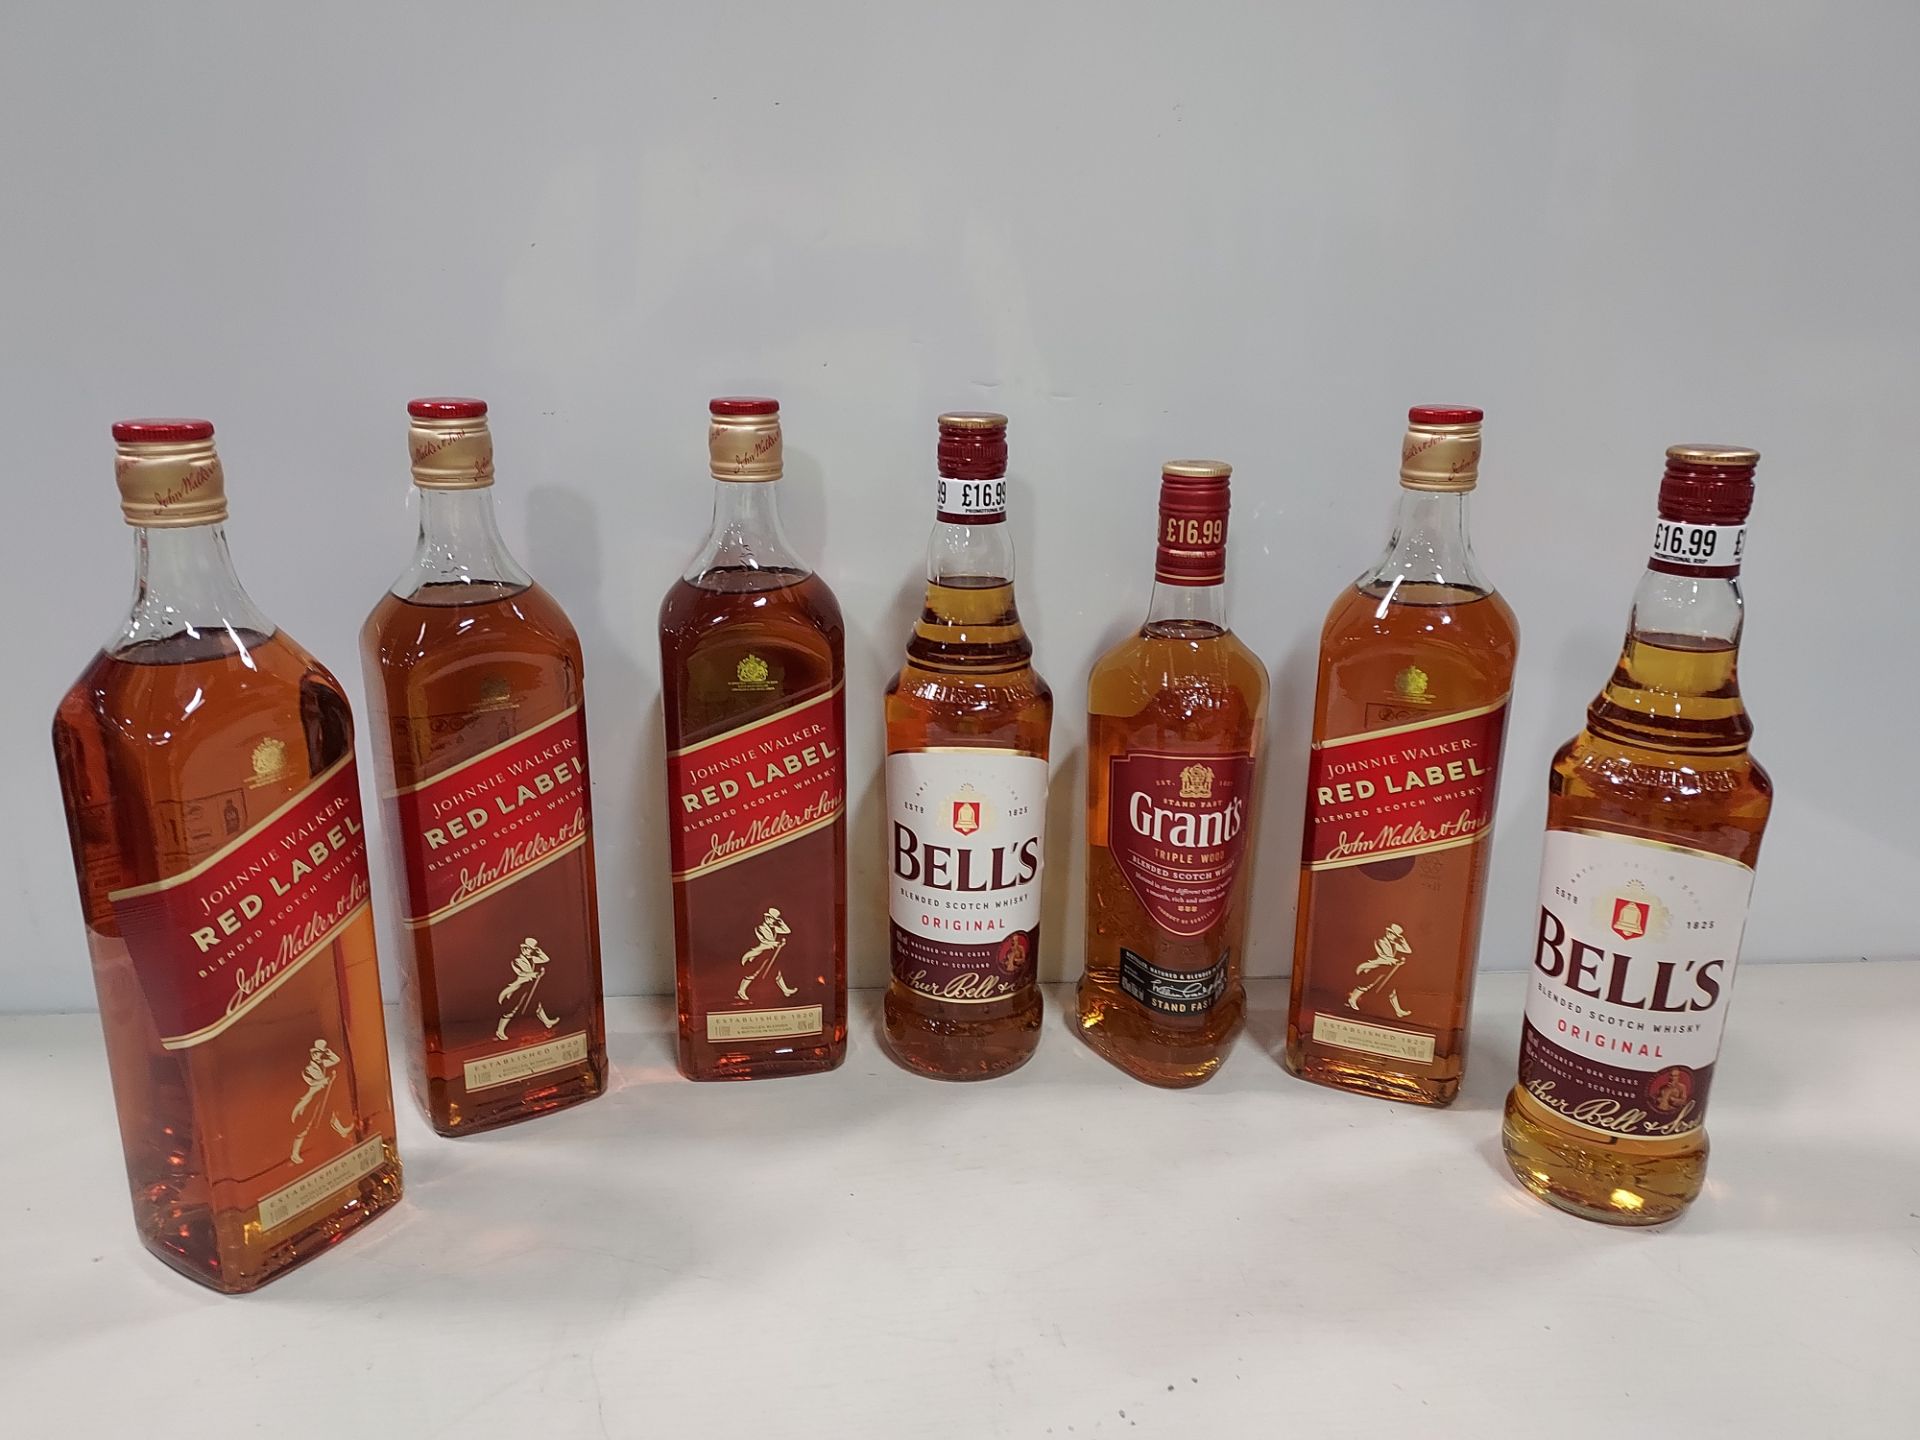 7 PIECE BRAND NEW MIXED ALCOHOL LOT CONTAINING 4 X 1L JOHNNIE WALKER RED LABEL WHISKEY - 2 X 1L